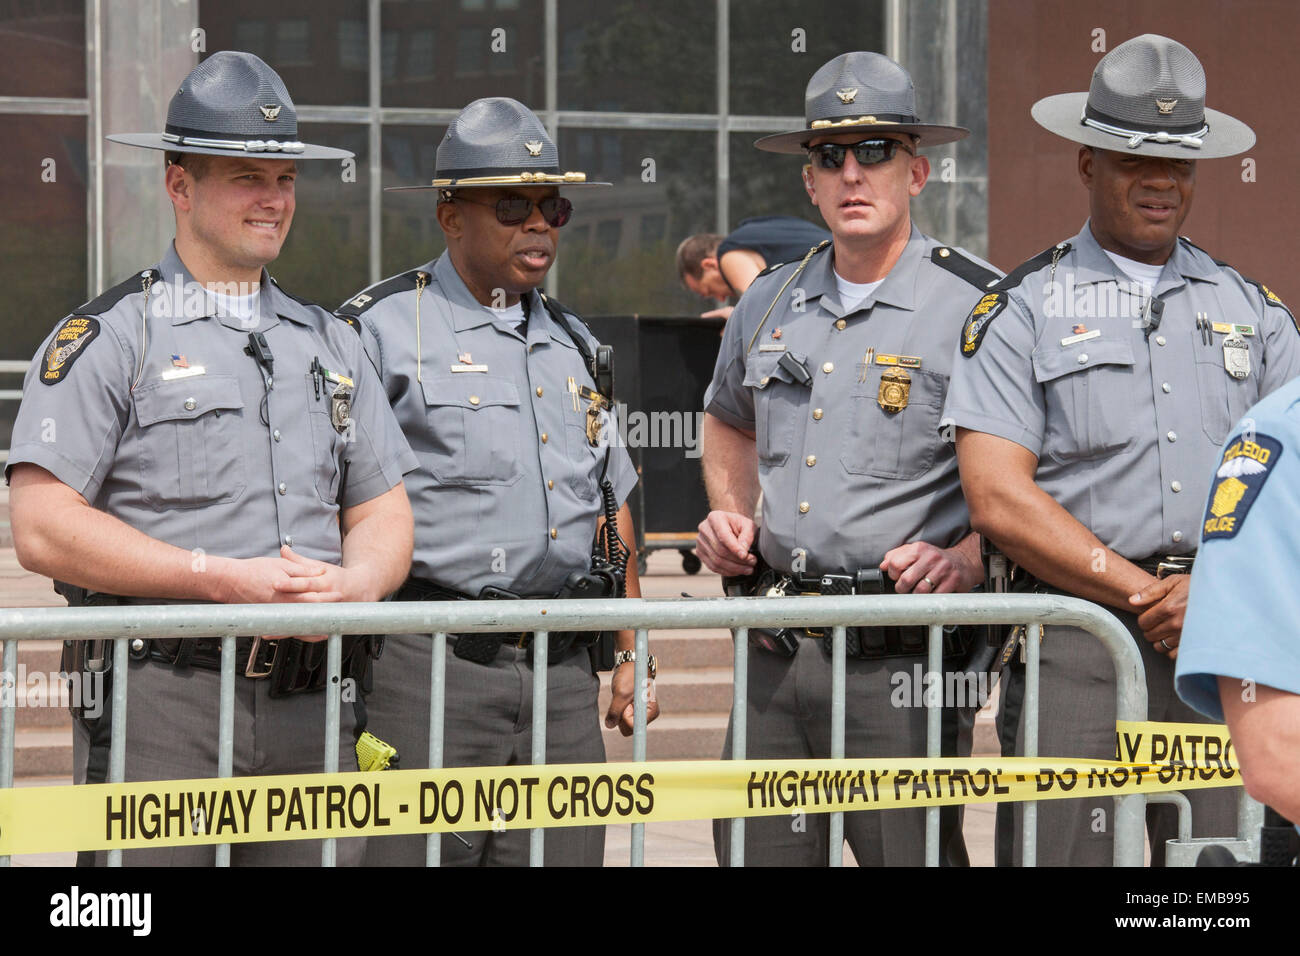 Toledo, Ohio - Ohio State Highway Patrol officers were among the police protecting a neo-Nazi rally. Stock Photo